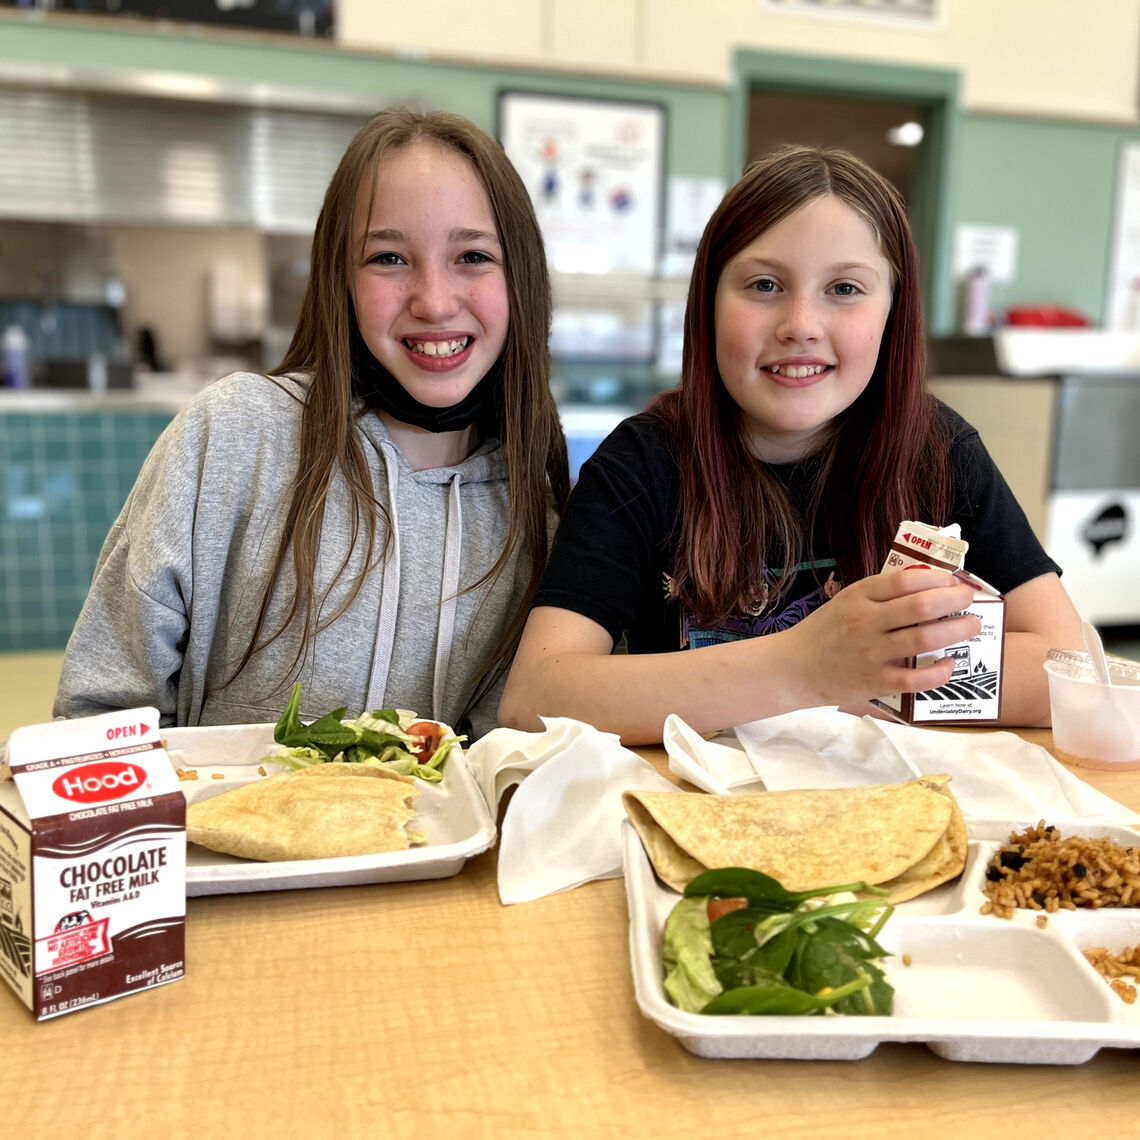 two girls eat school lunch in the cafeteria